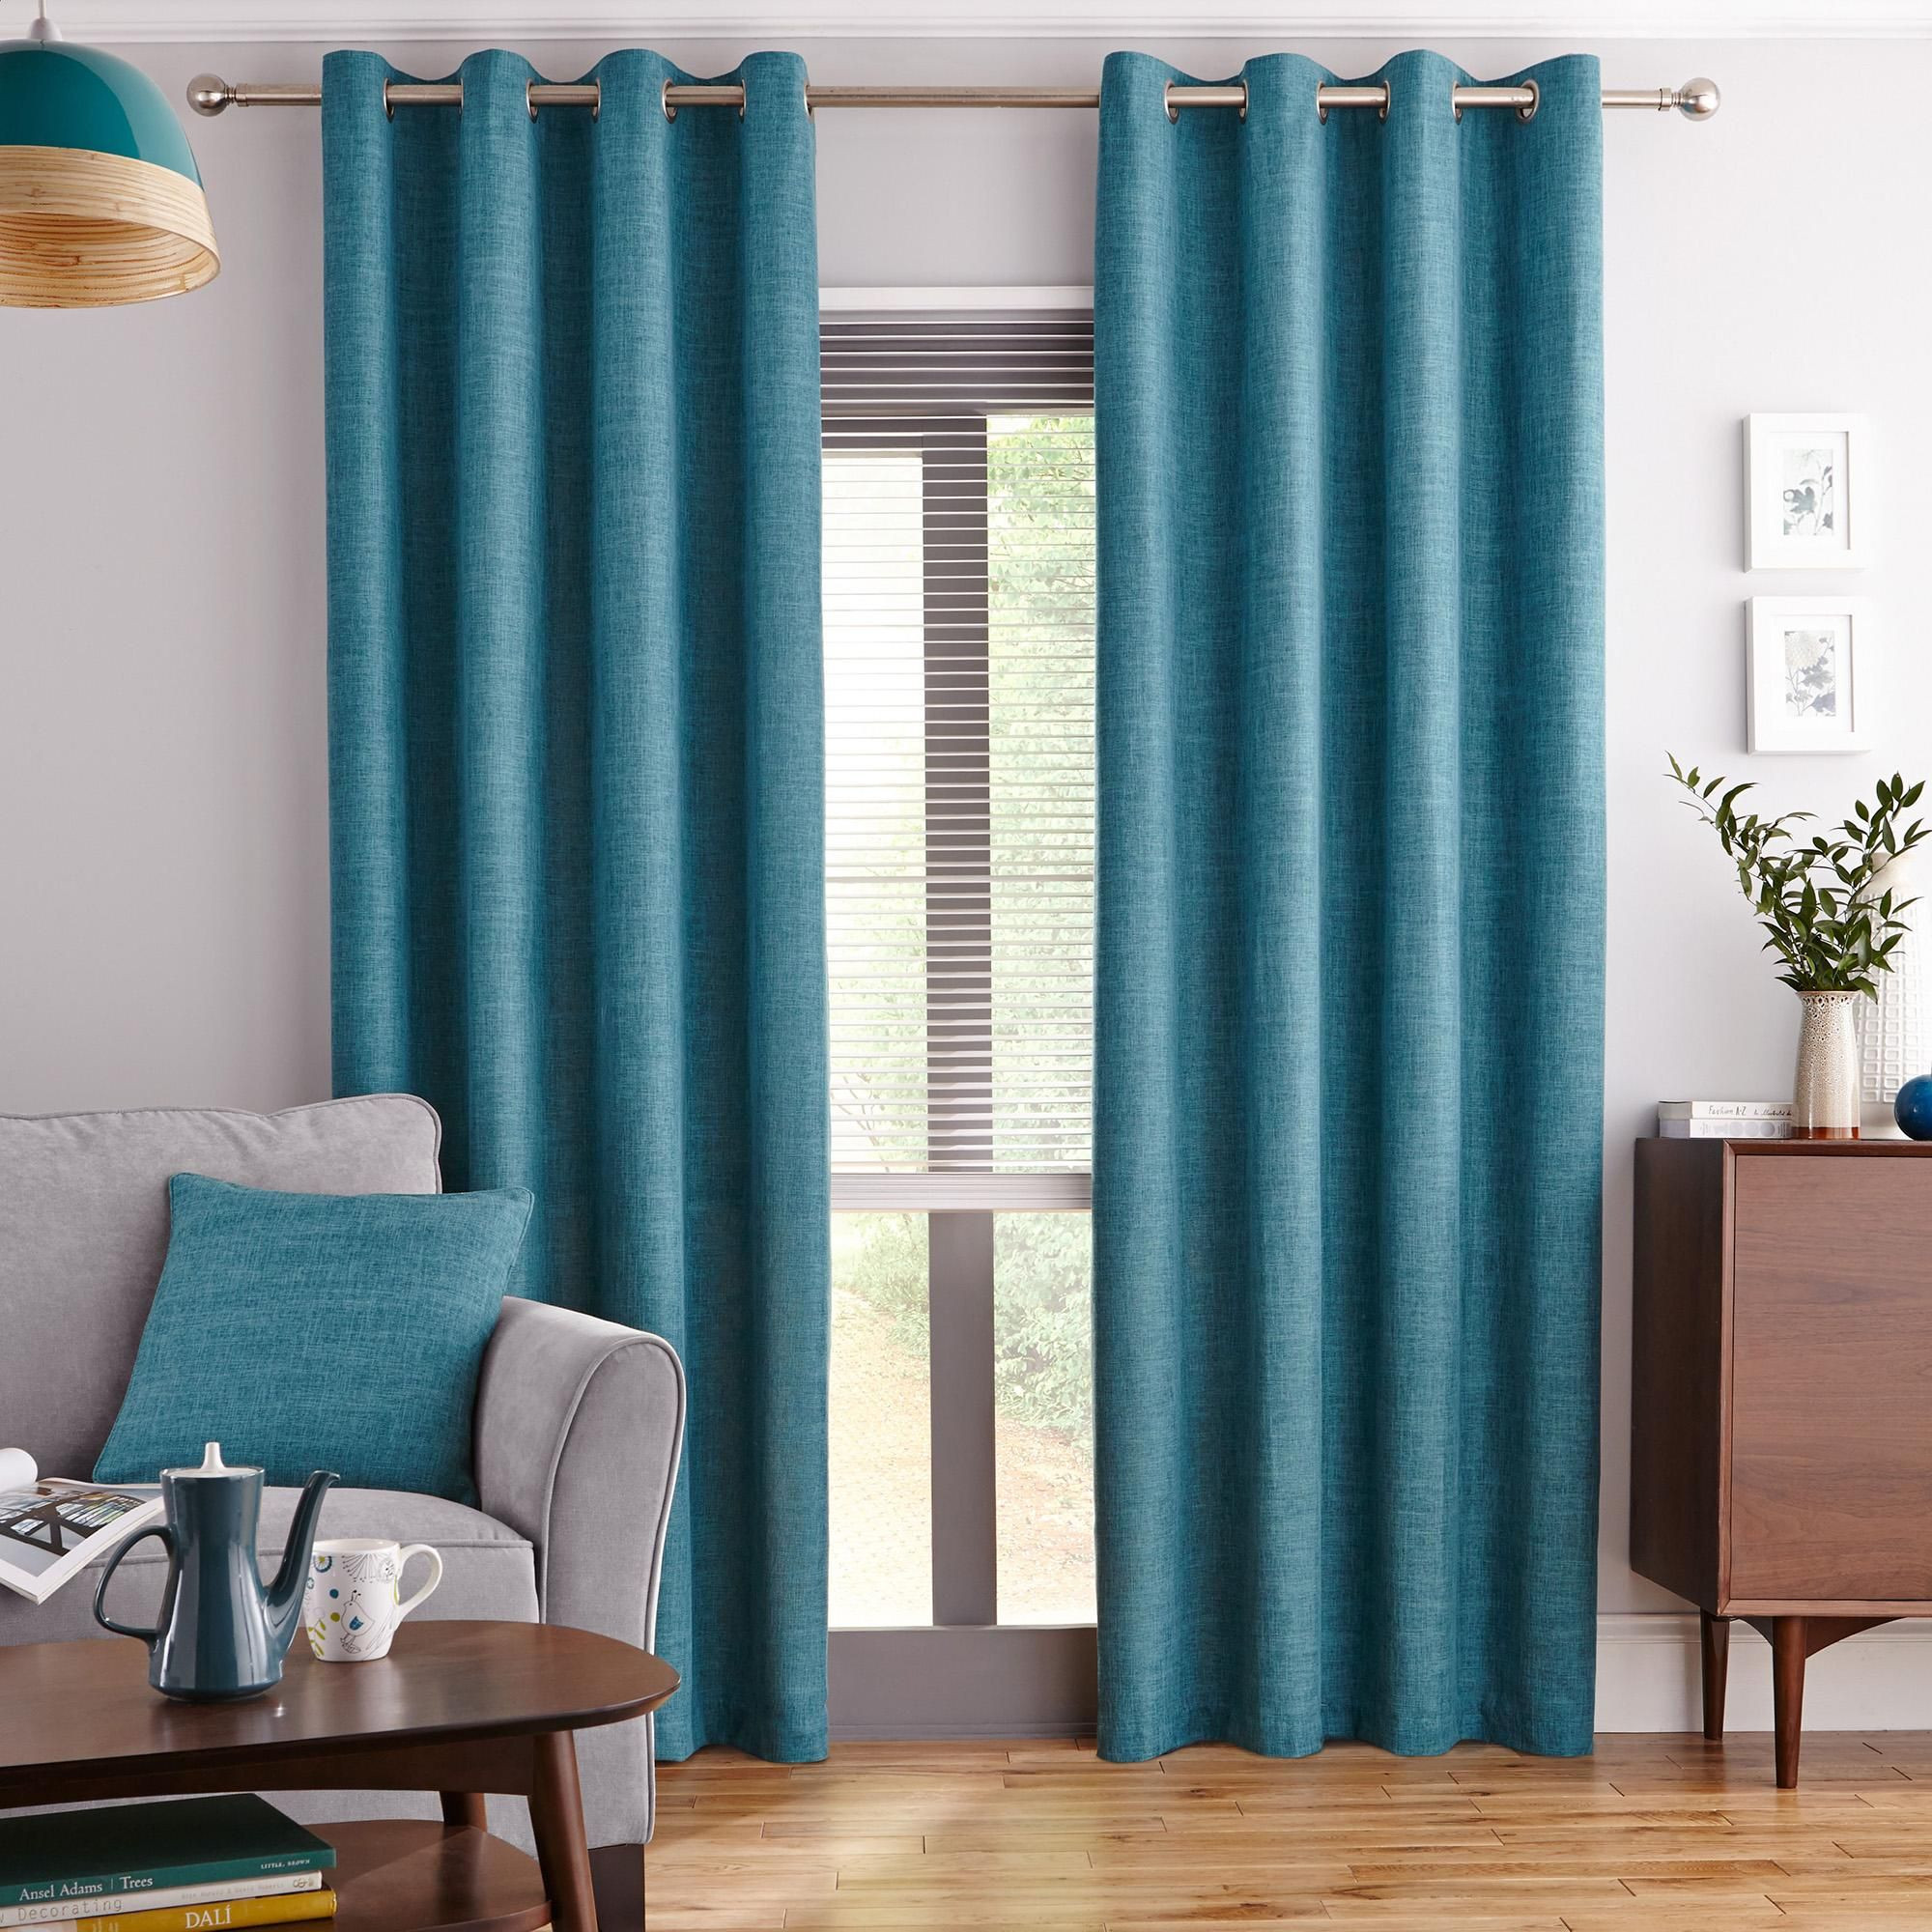 Teal Living Room Curtains
 Vermont Teal Eyelet Curtains in 2020